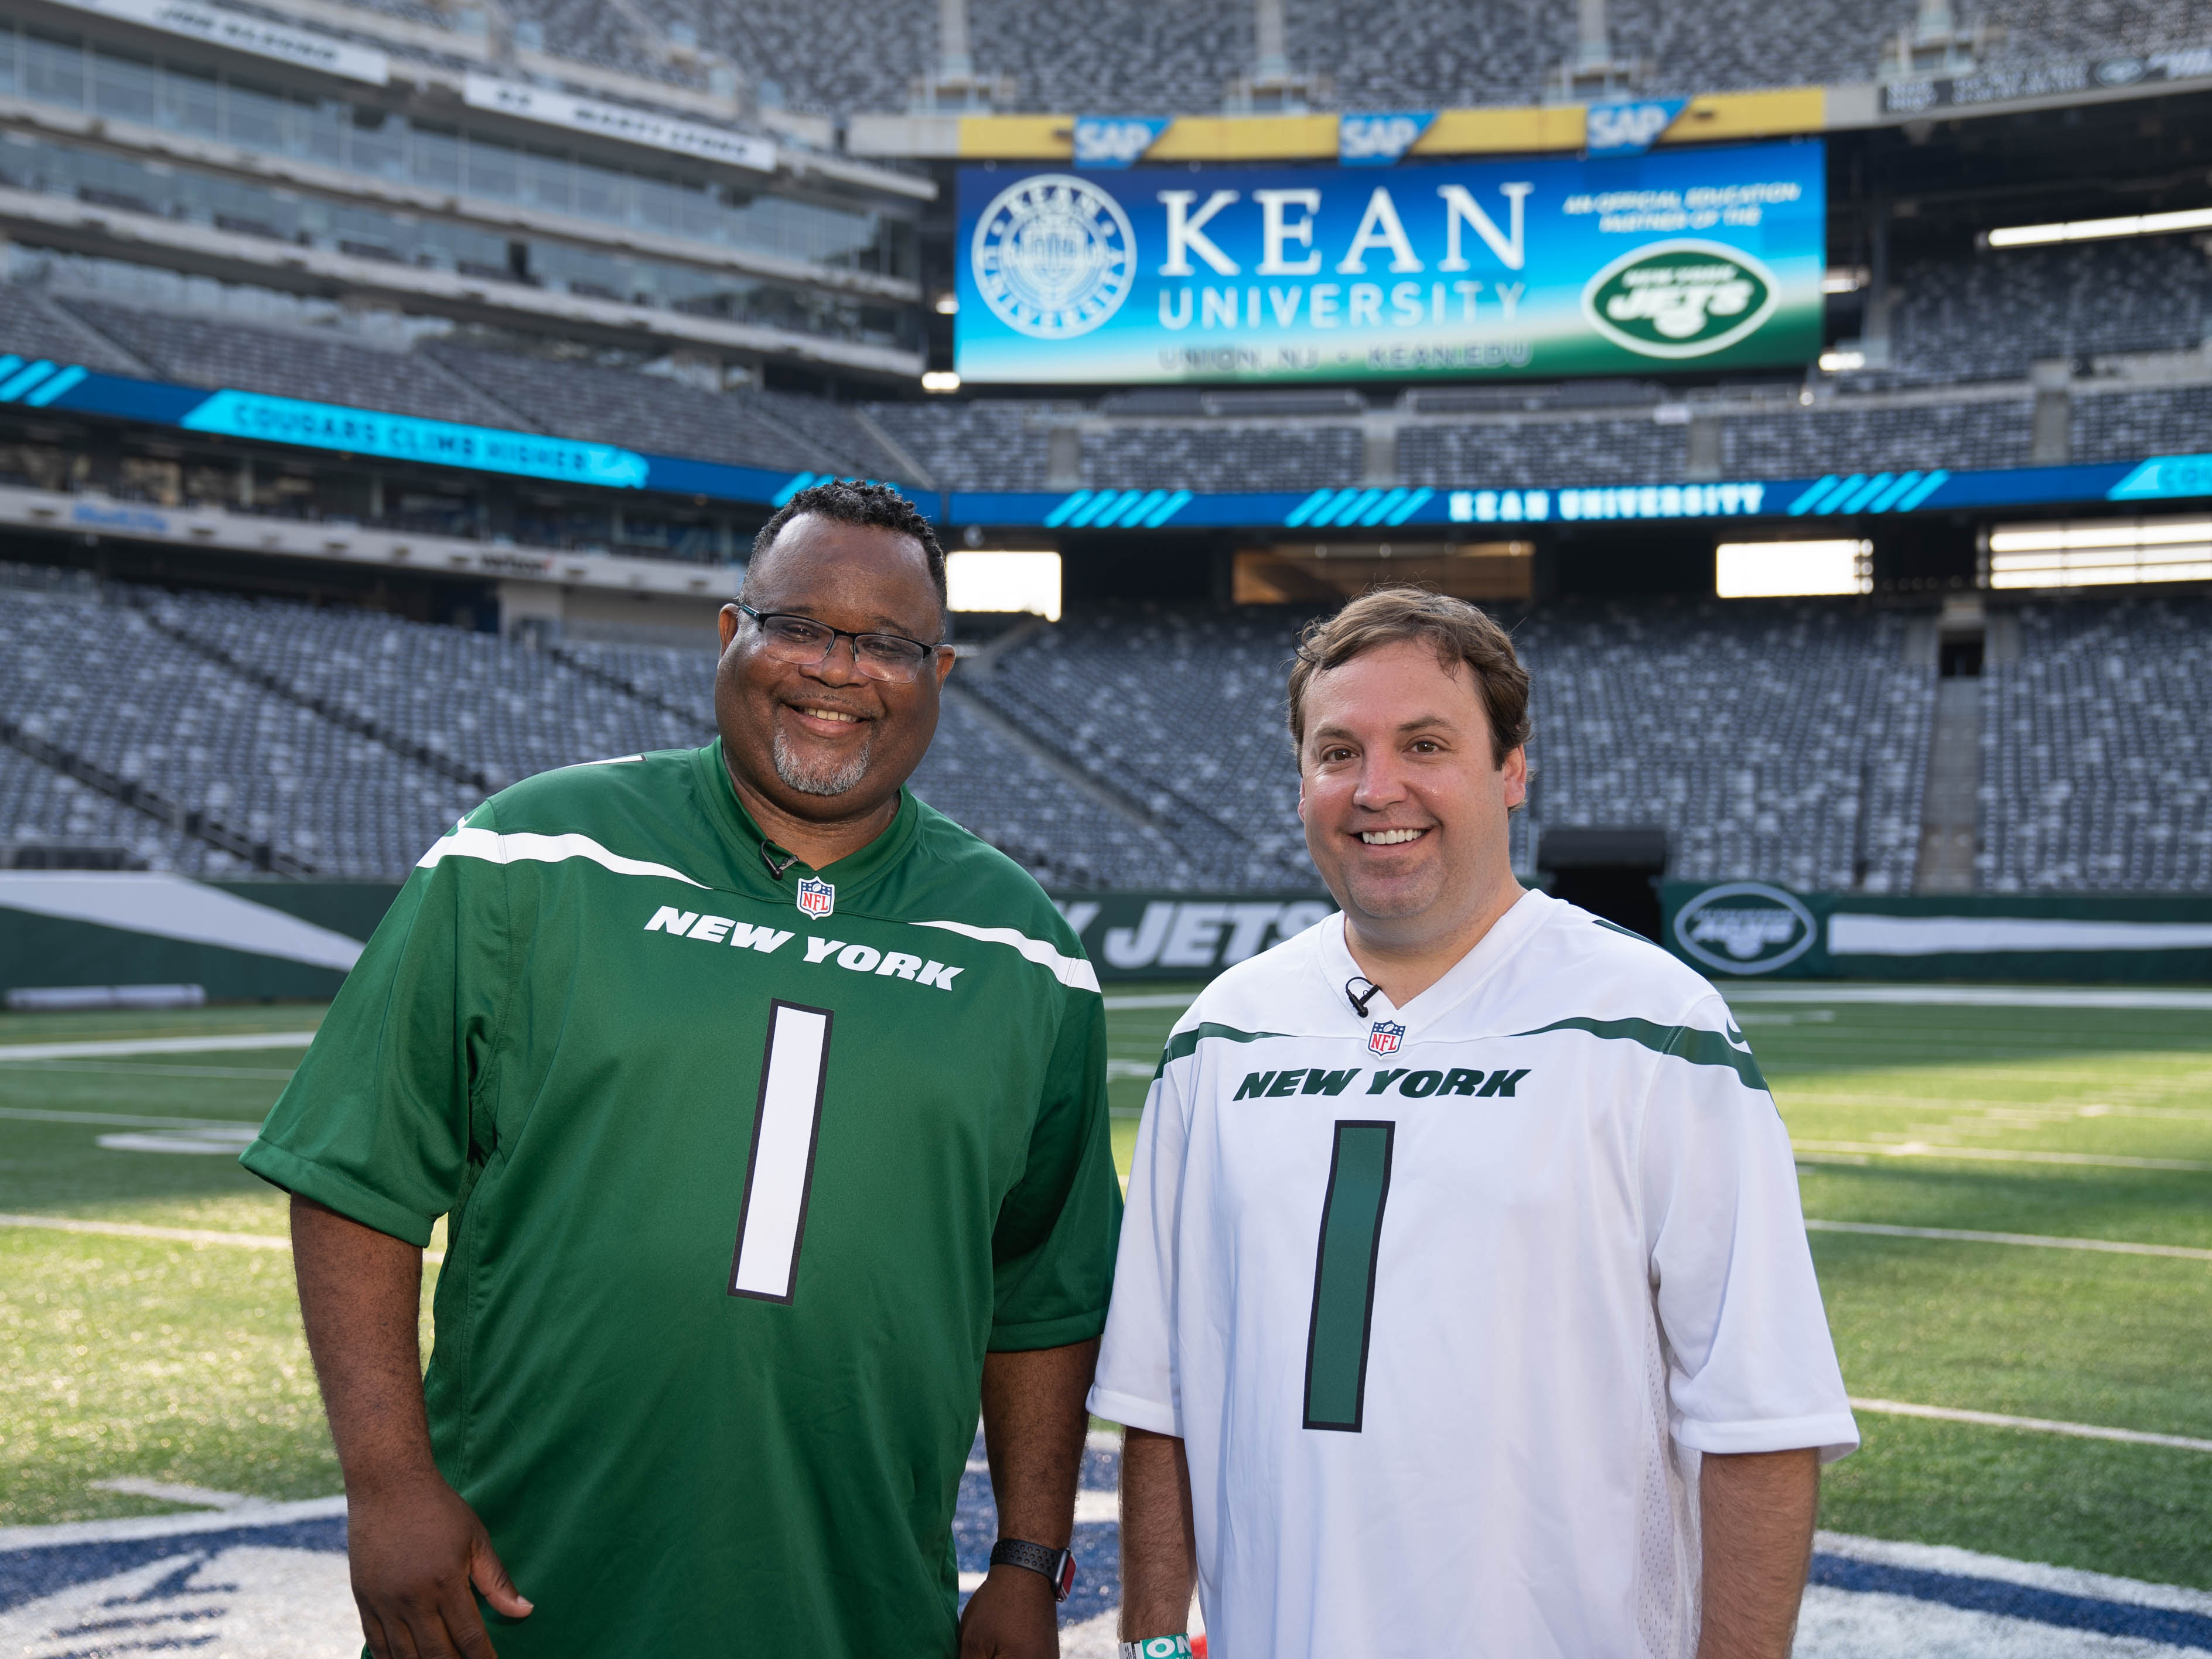 Kean University President Lamont O. Repollet, Ed.D., and Kean Foundation CEO Bill Miller on the field at MetLife Stadium.